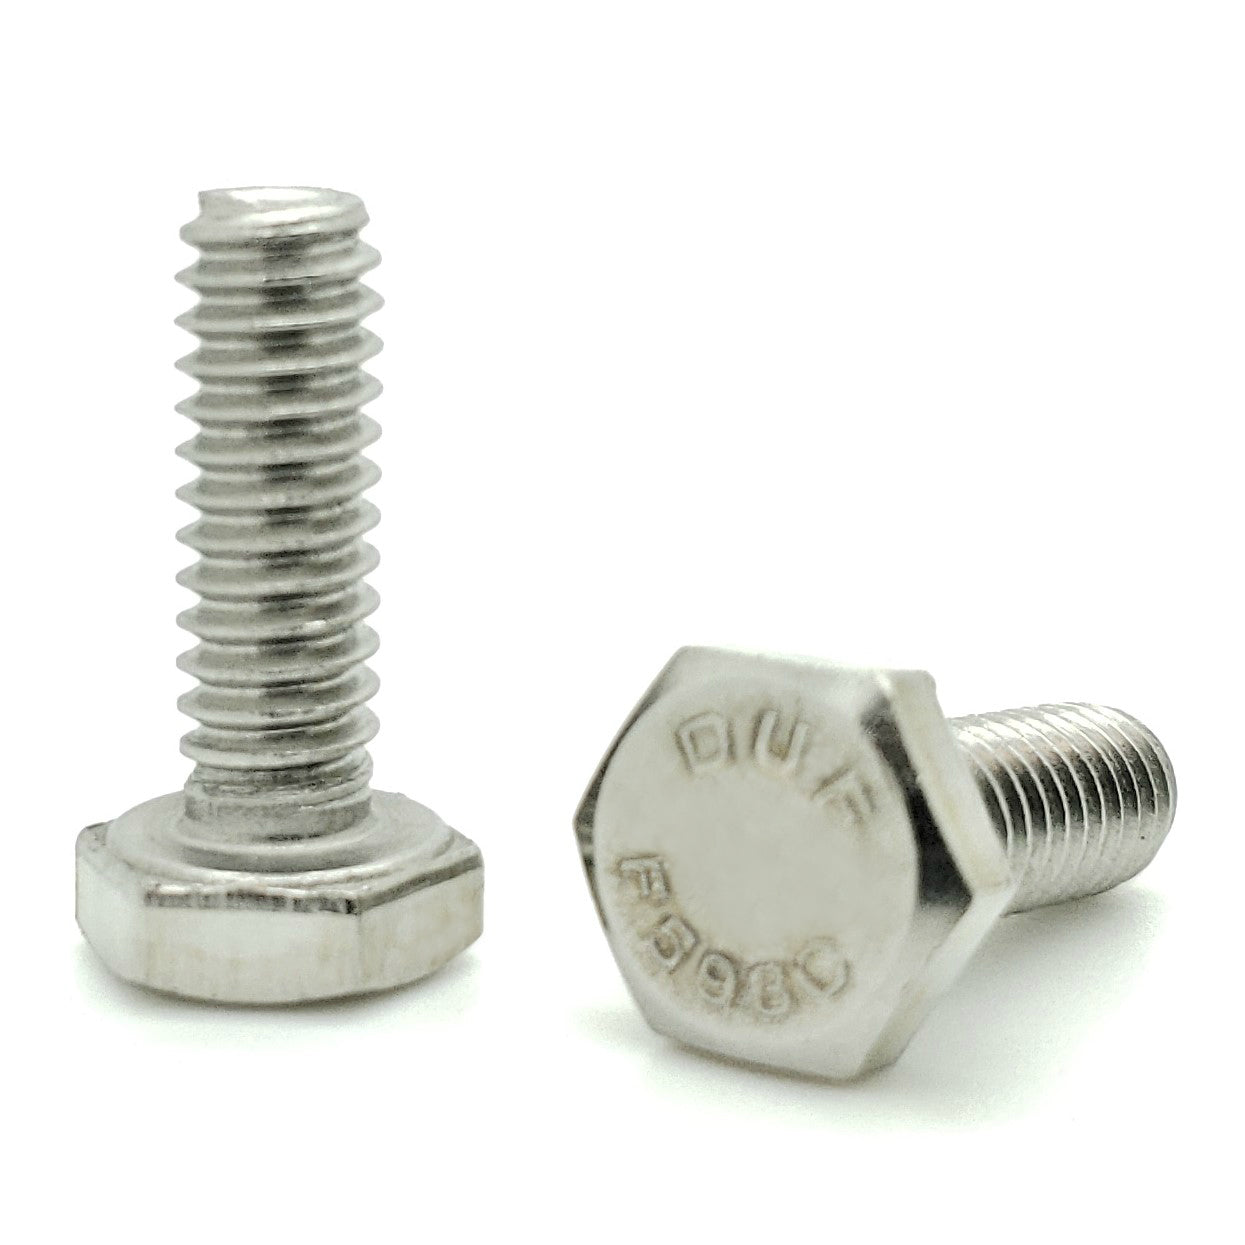 1/4-20 x 3/4" 304 Stainless Hex Bolts